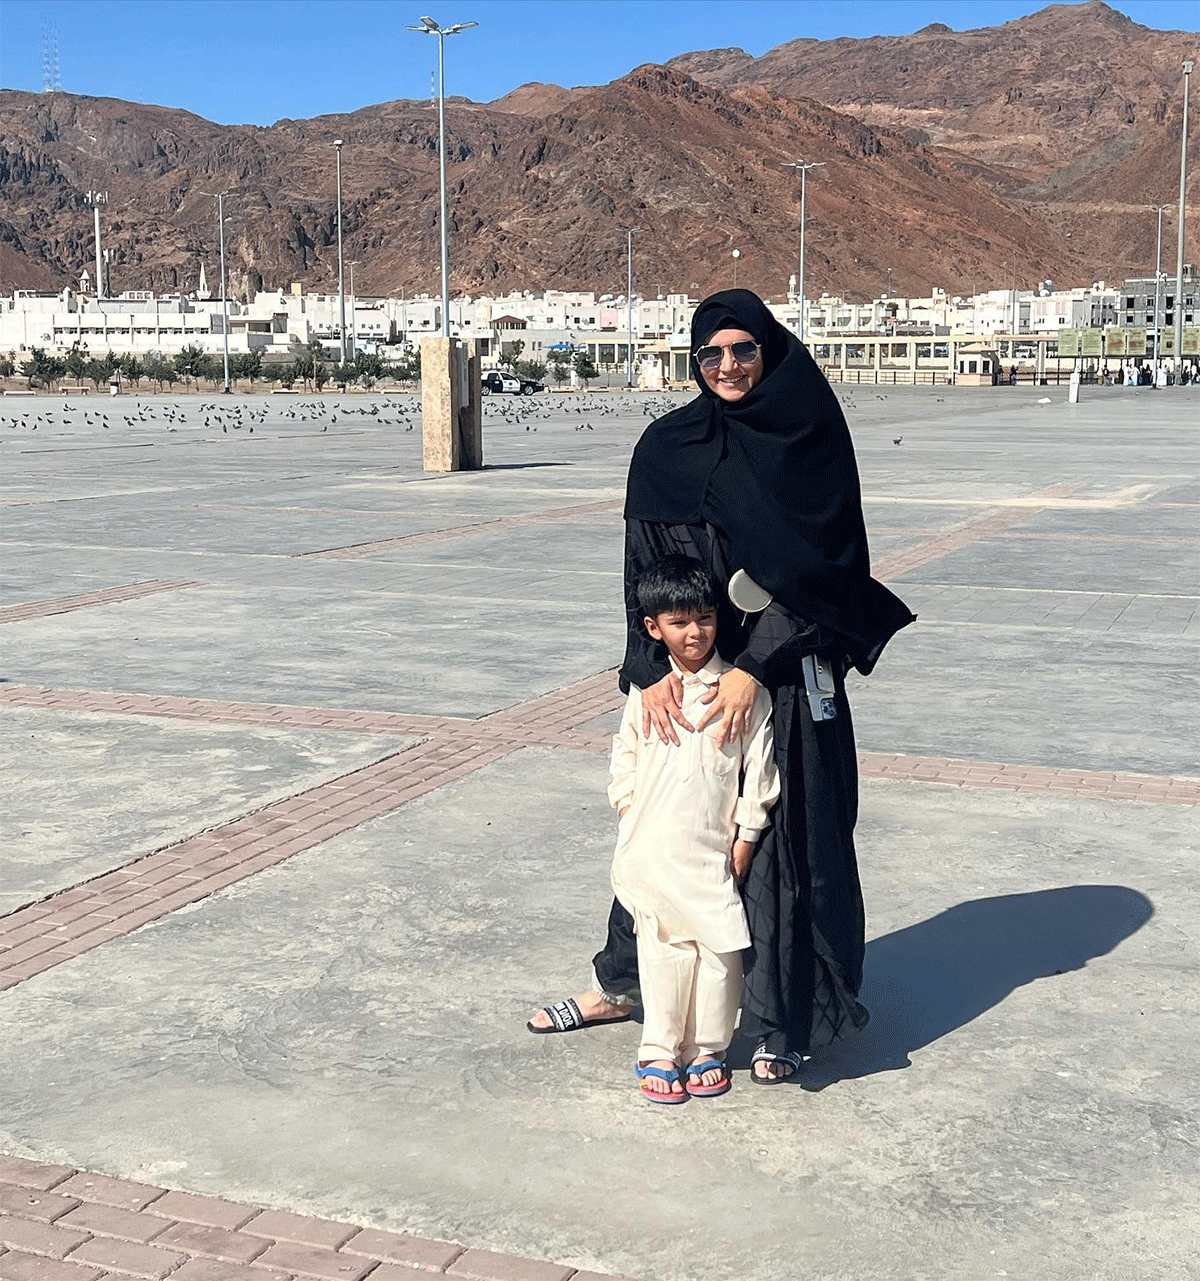 Sania Mirza with her son Izhaan in Medina